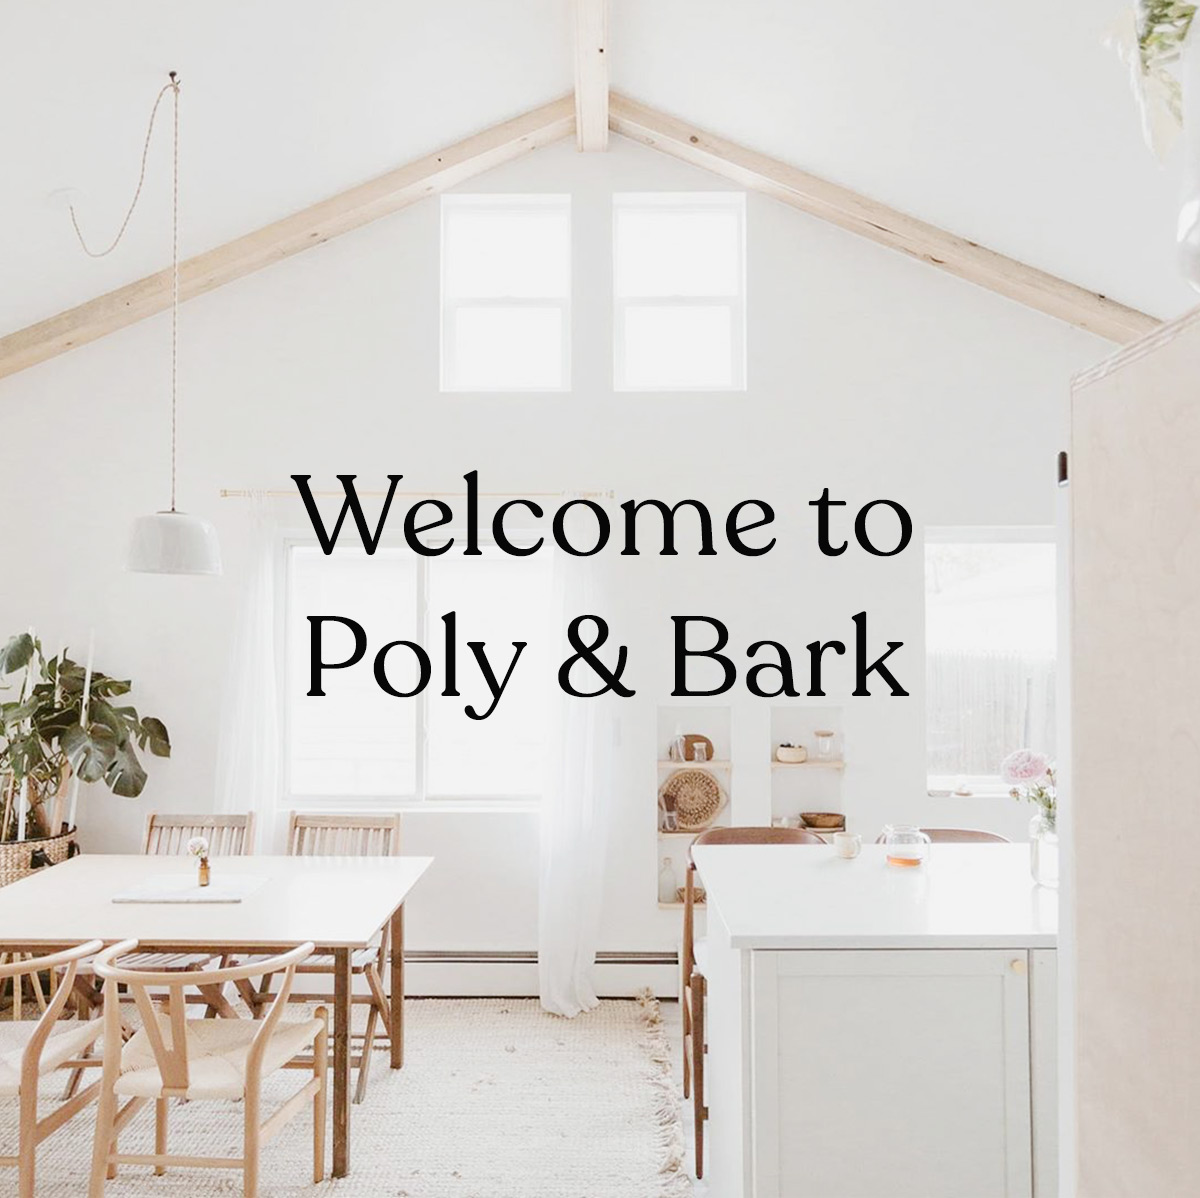 Welcome to Poly & Bark!